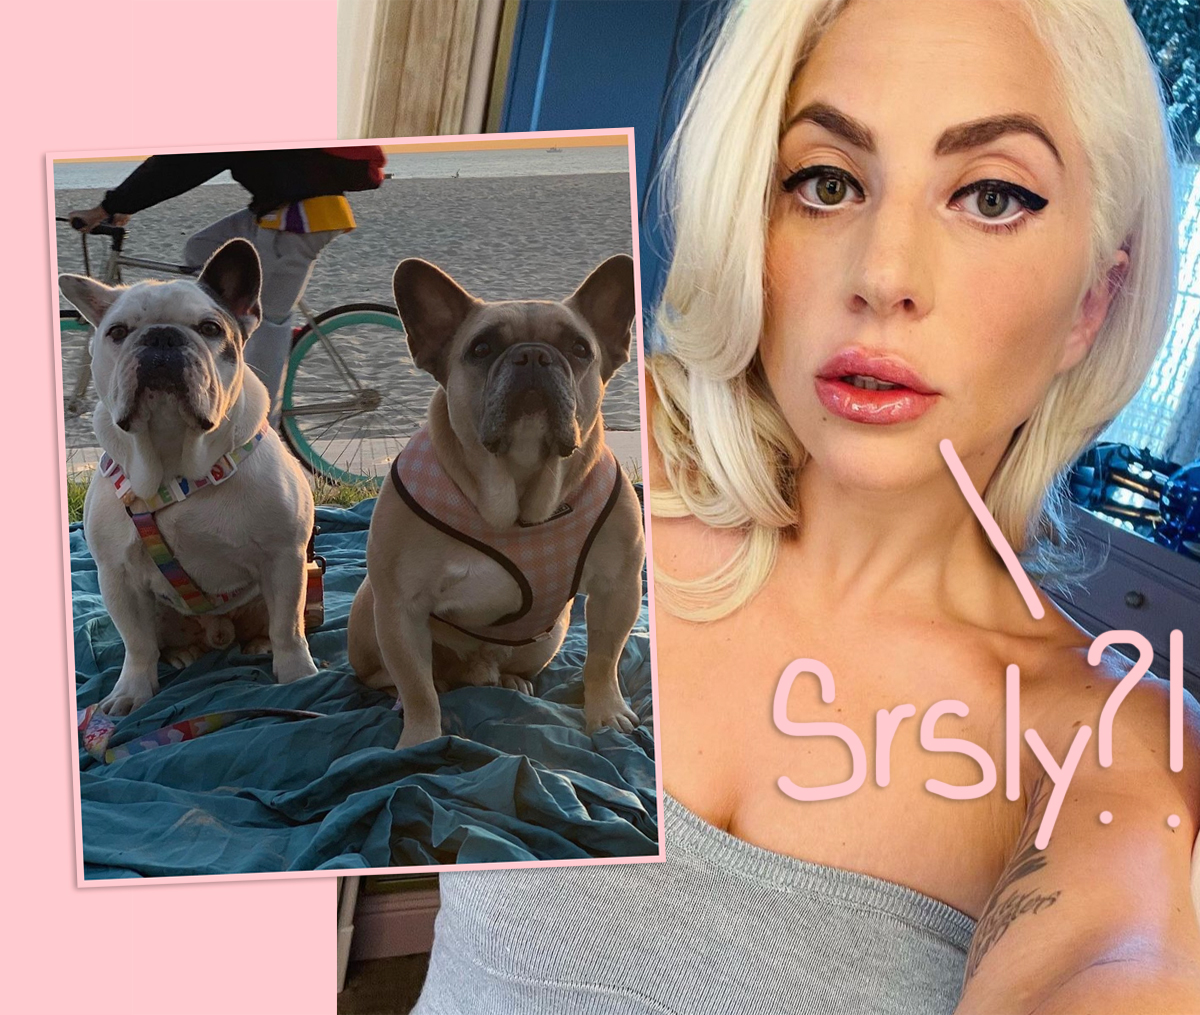 #Lady GaGa Dogs: Woman Charged In Kidnapping Sues For ‘No Questions Asked’ $500,000 Reward!